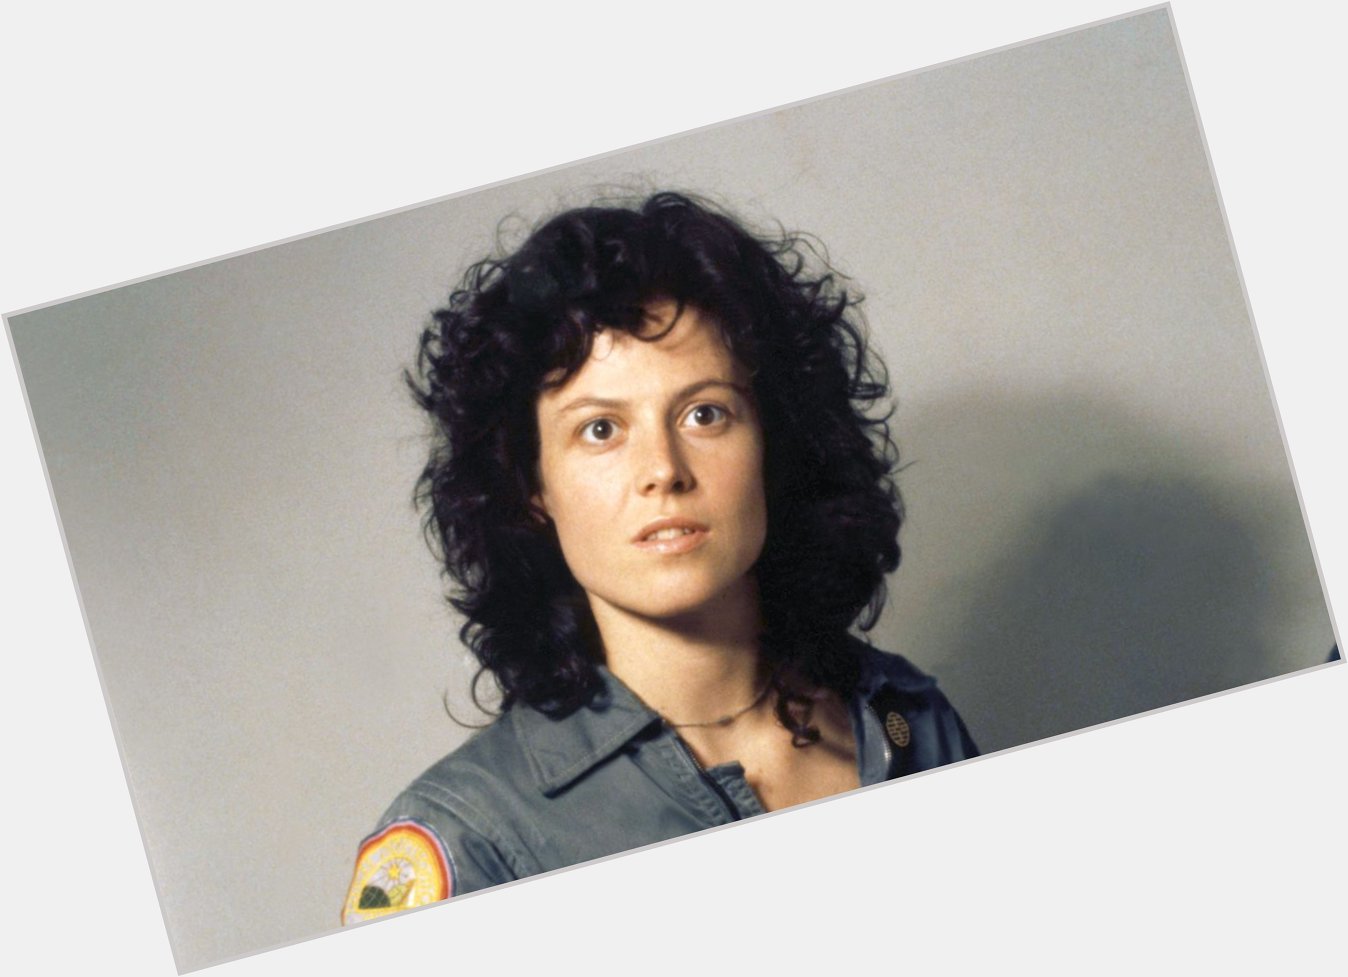 Happy Birthday to Sigourney Weaver, who was born on today\s date in 1949. 